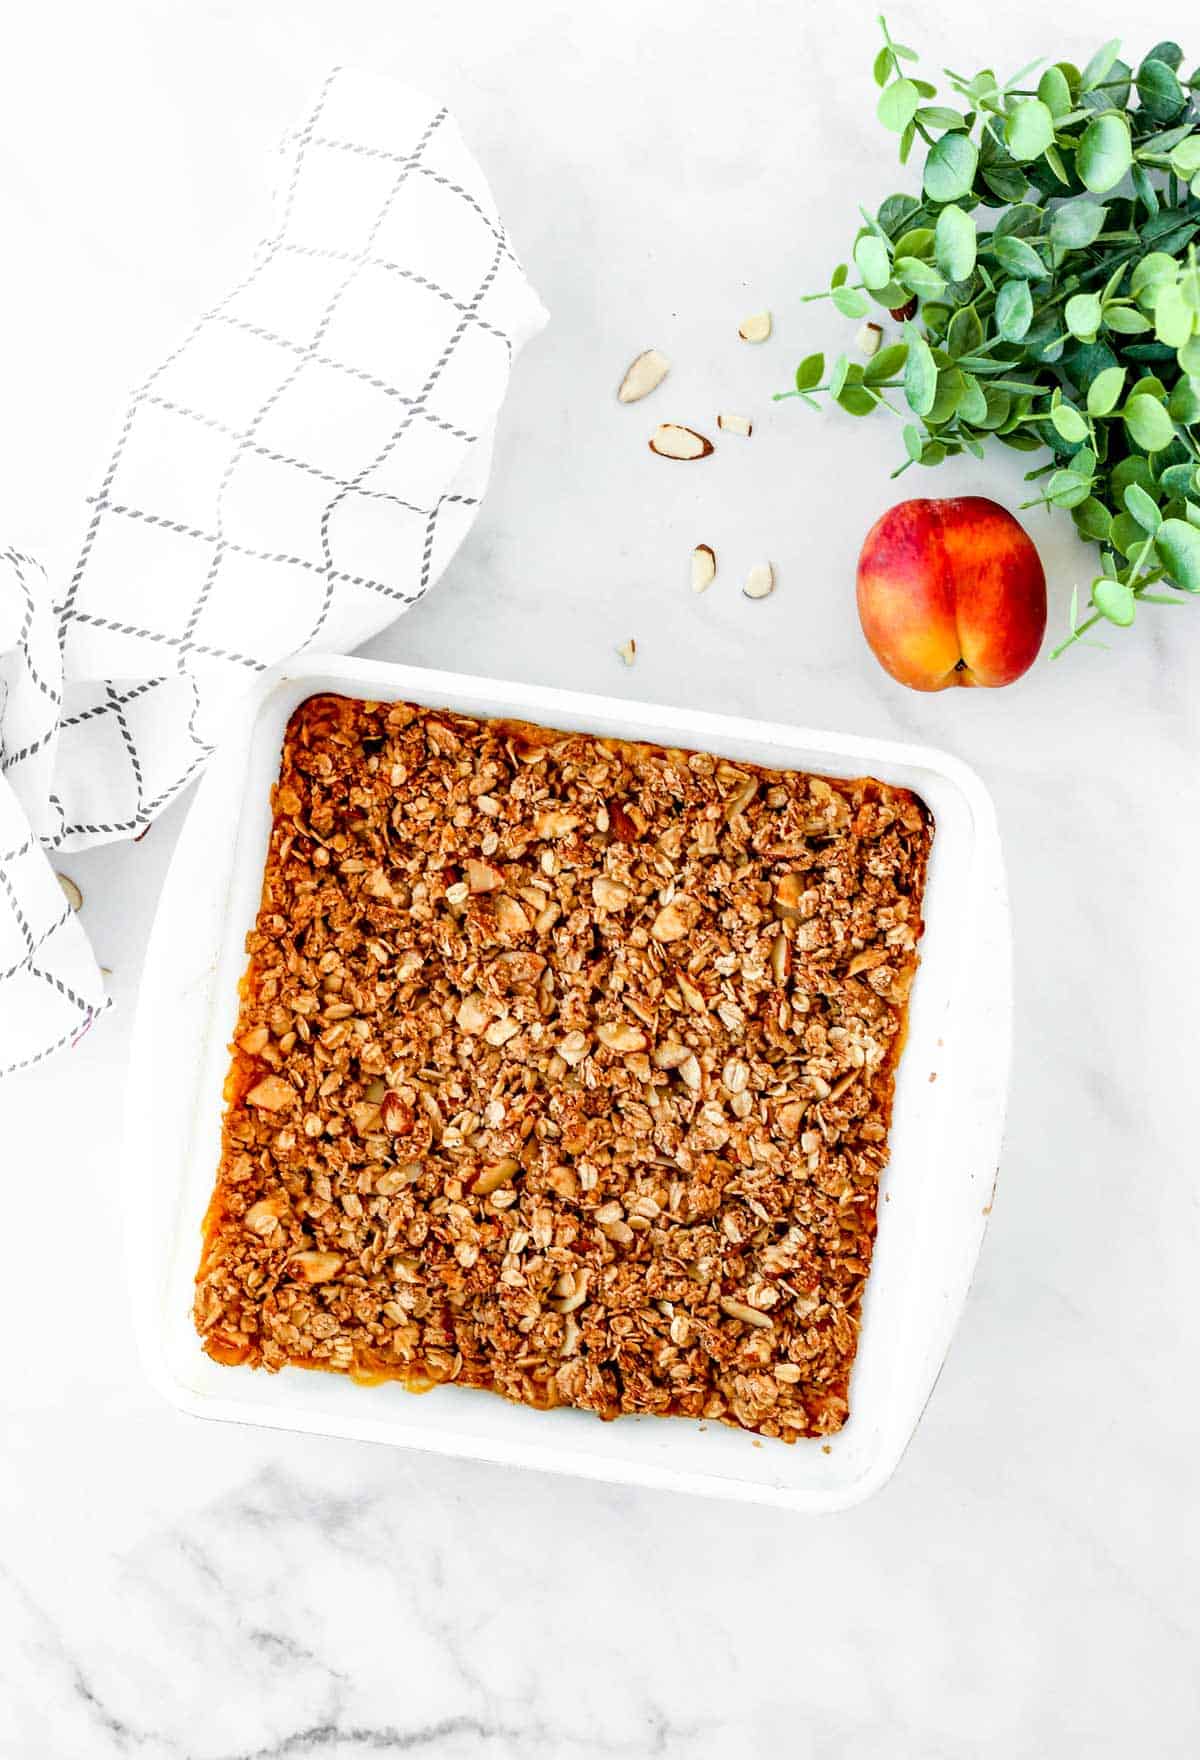 Easy peach crisp with oatmeal topping in a baking dish.